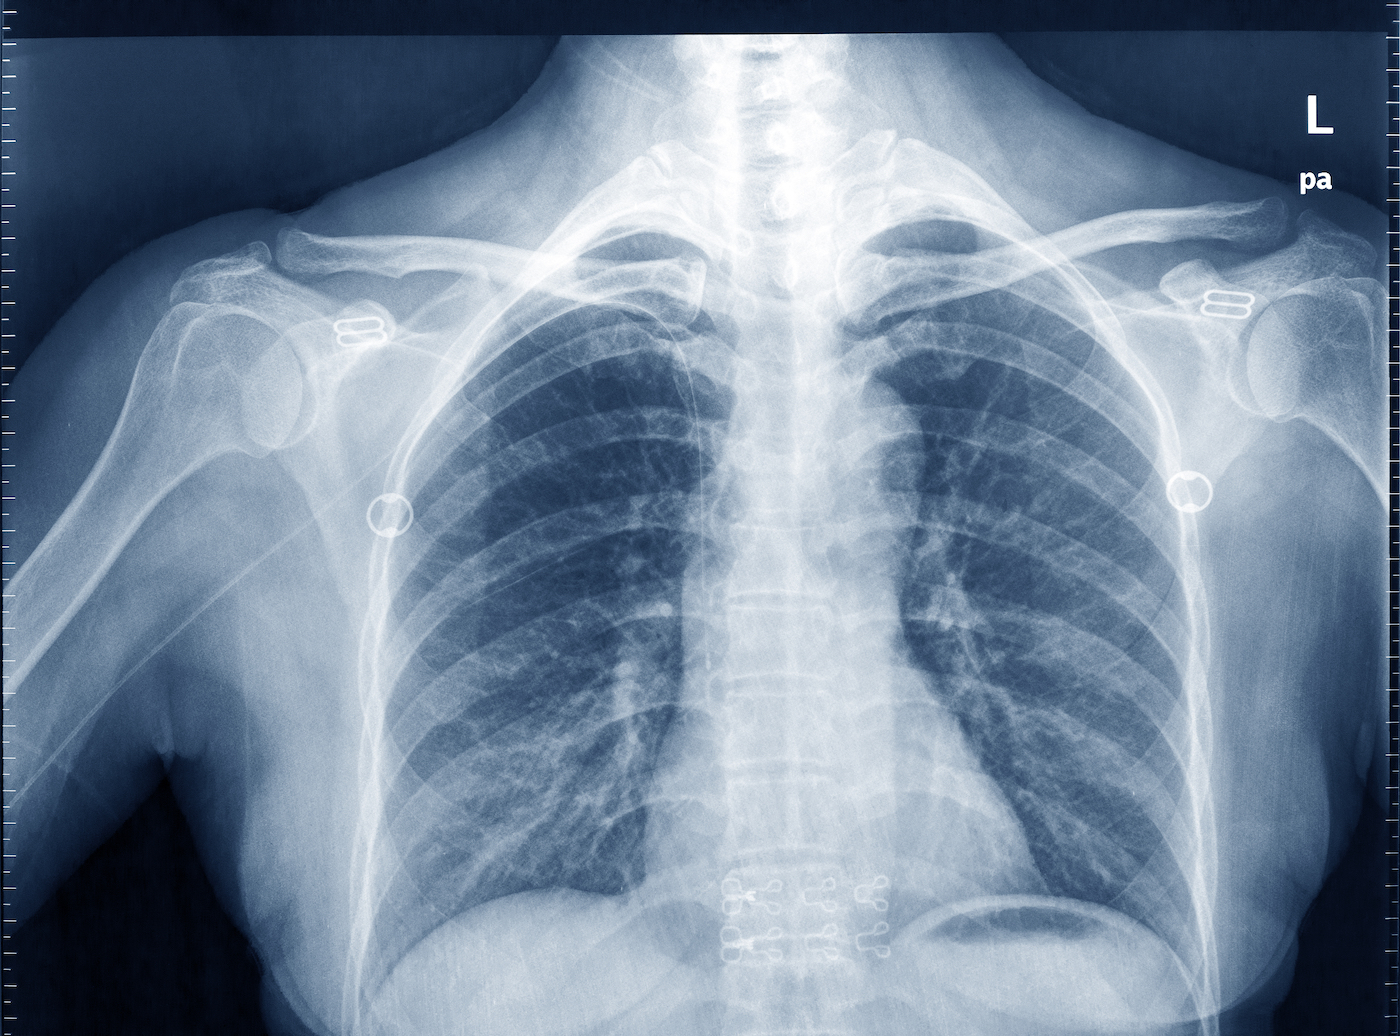 Using AI to Predict Heart Disease from Chest X-Rays